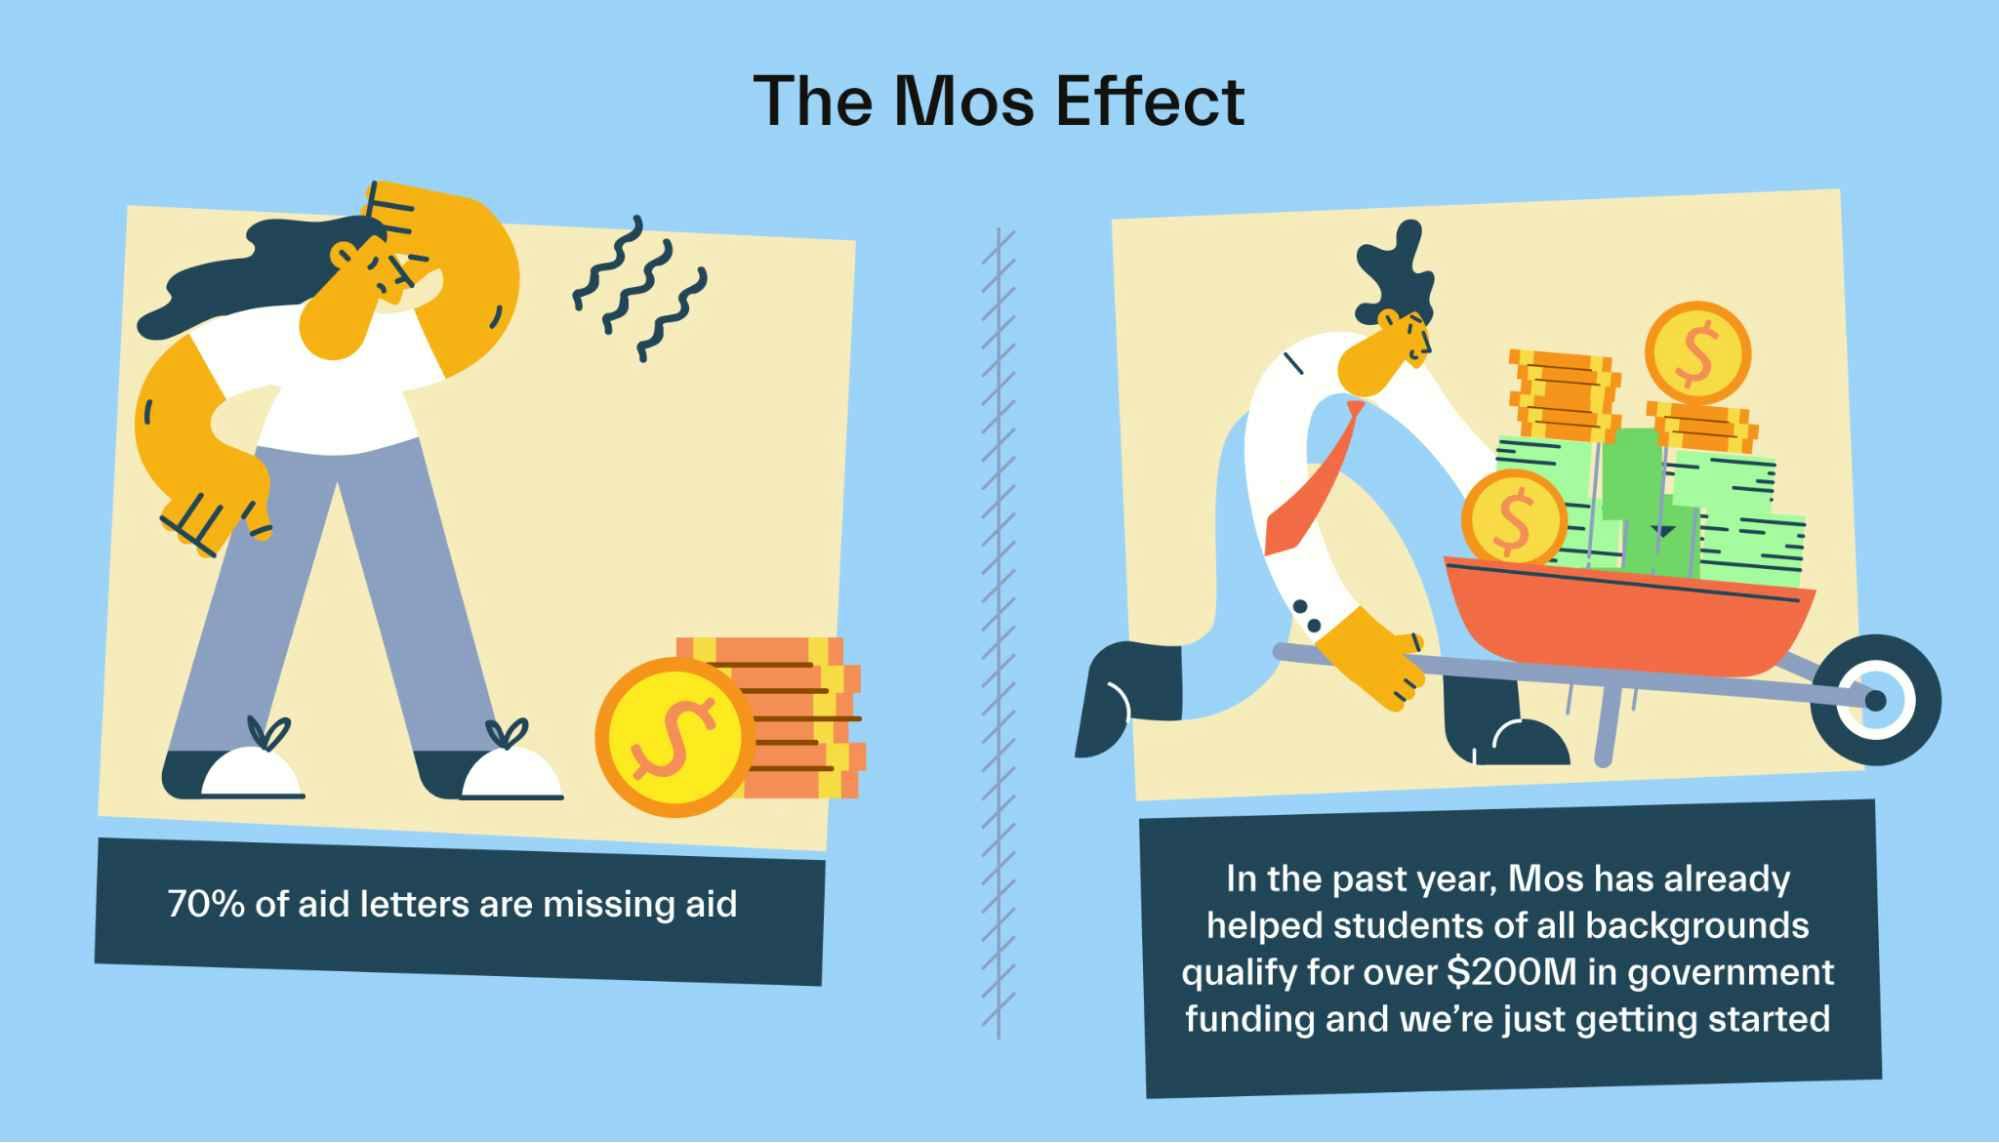 The Mos Effect